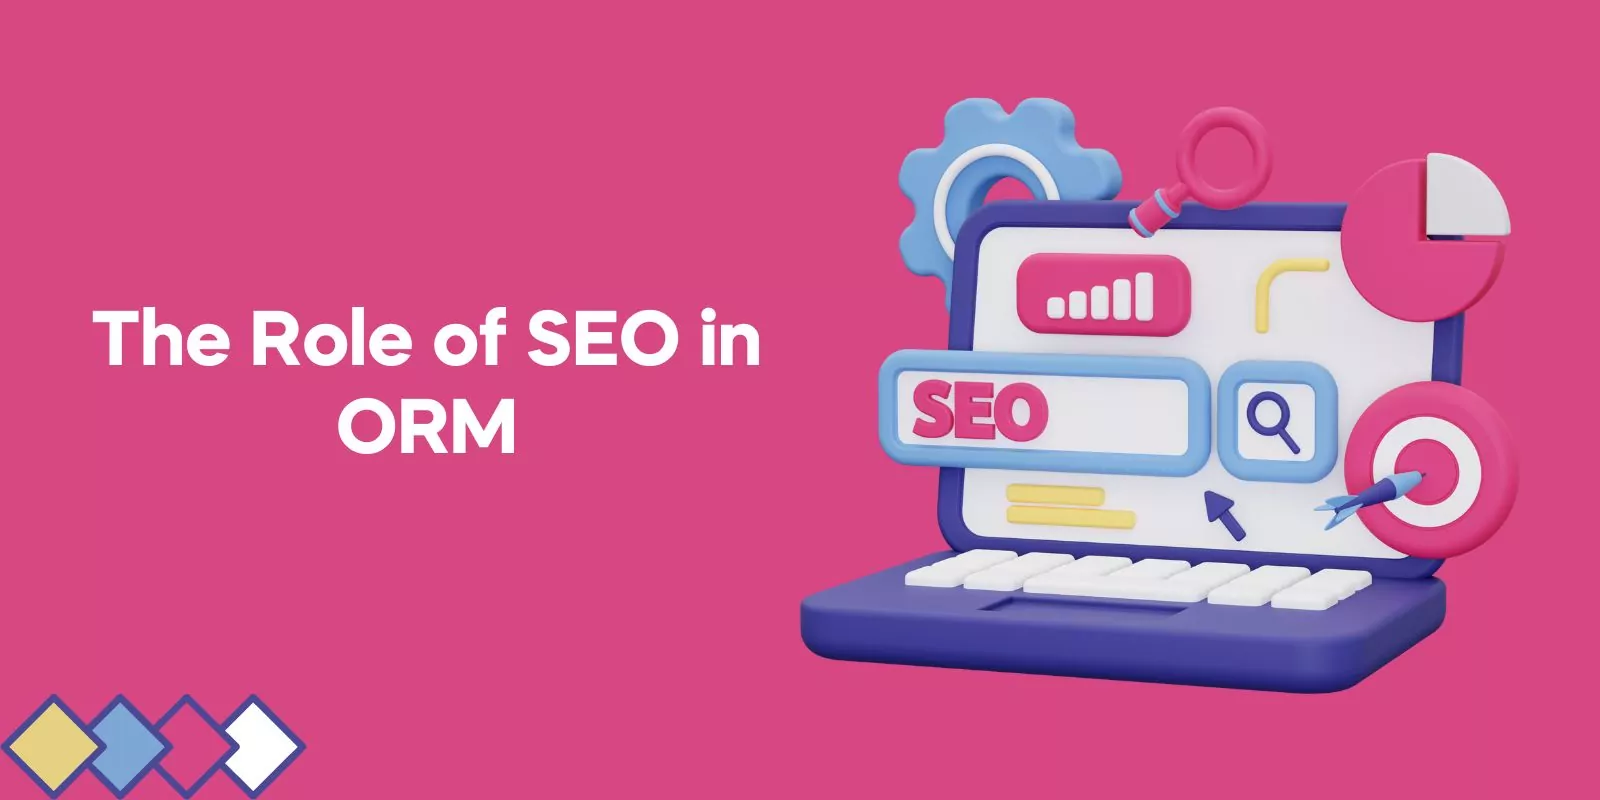 The Role of SEO in ORM